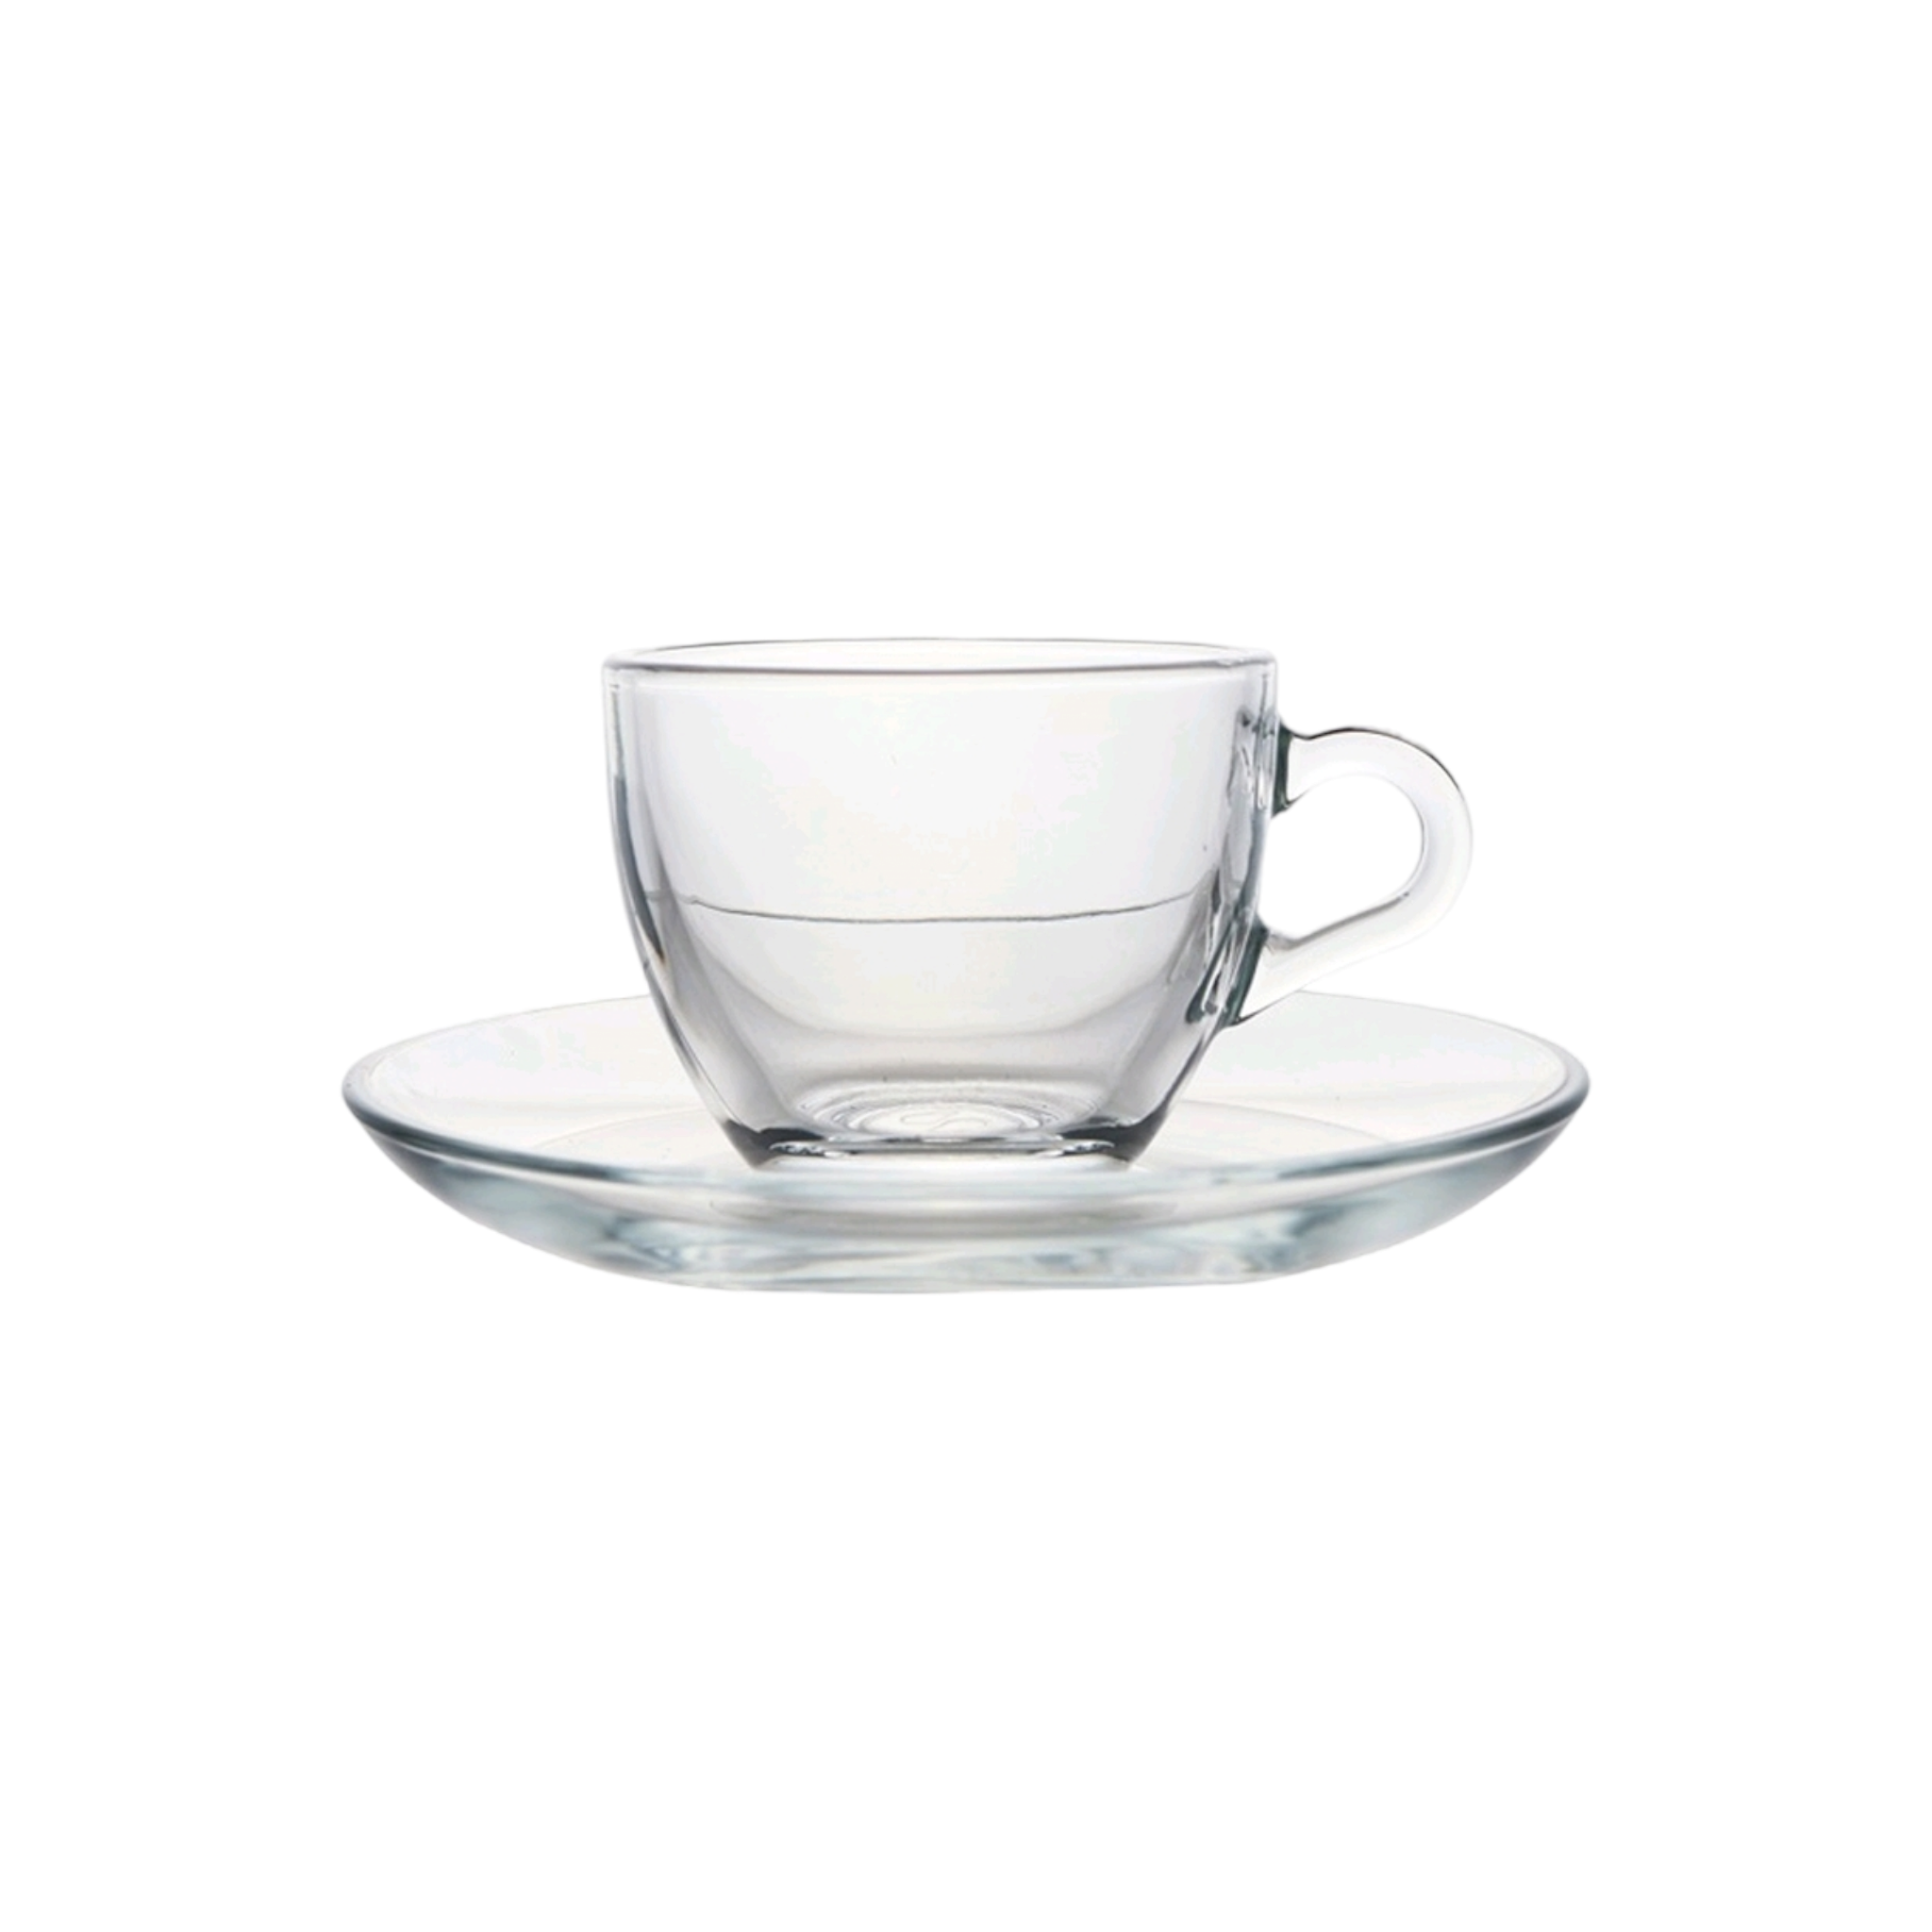 Pasabahce Espresso Cup and Saucer 85ml 6pc 23623